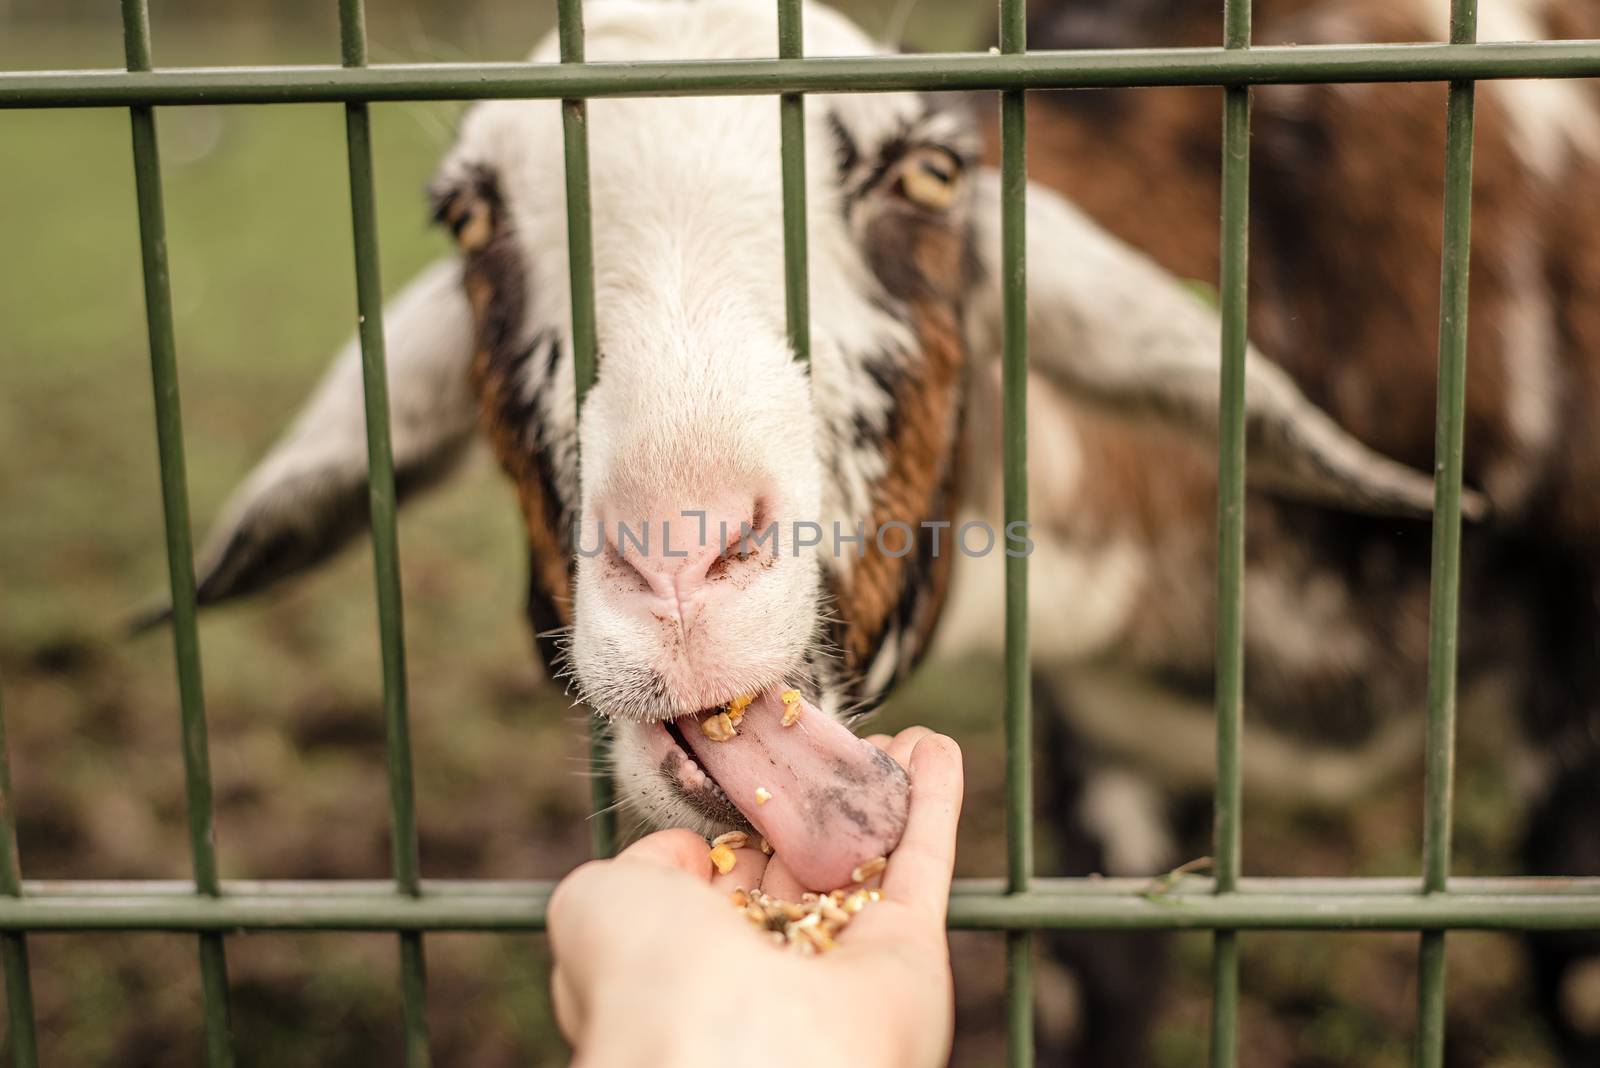 A goat licking food out of a persons hand